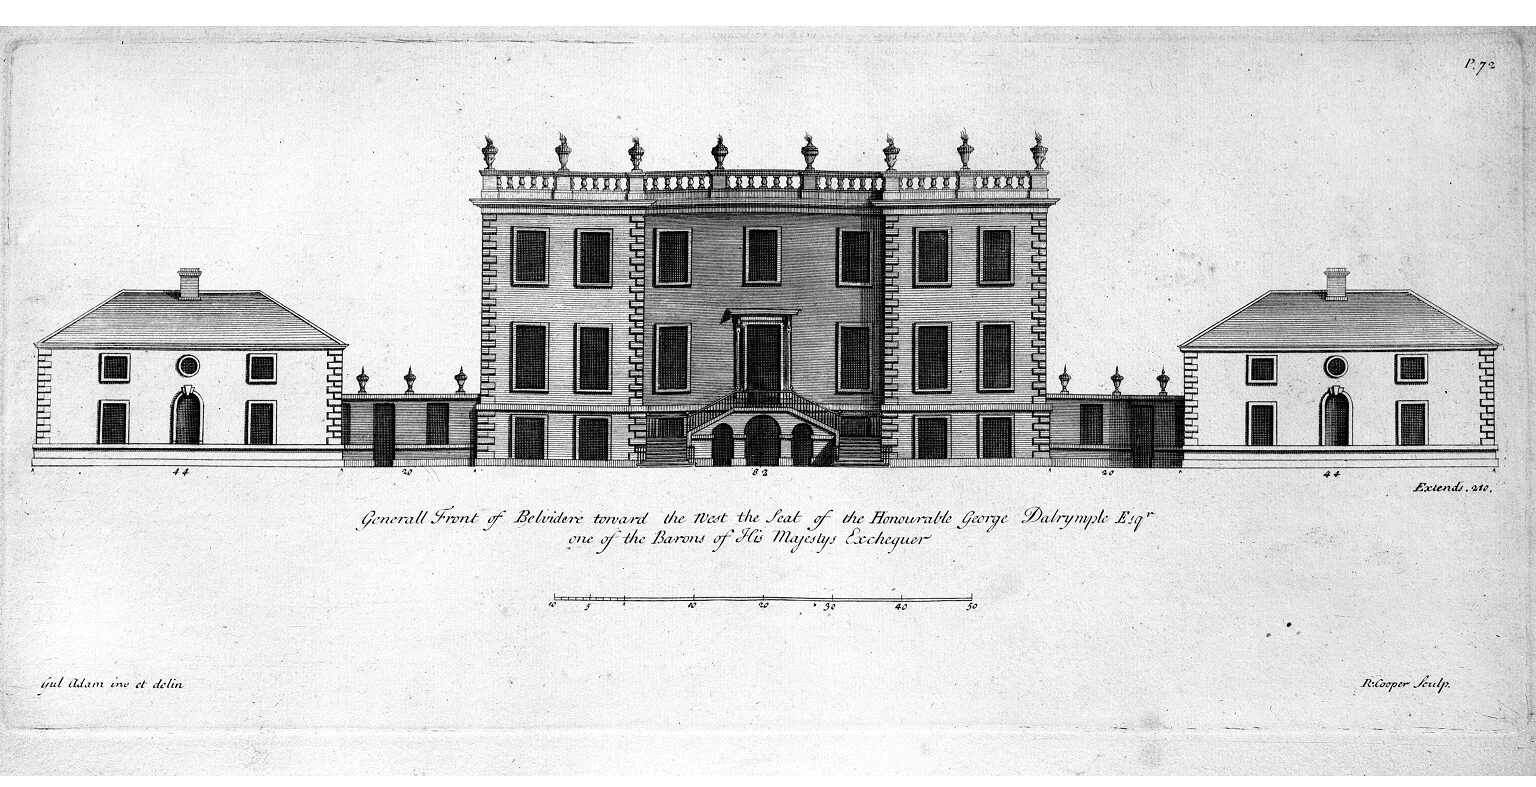 A black and white photo of an engraving of Dalmahoy House. The writing on the image reads: "Generall Front of Belvidere toward the West the Seat of the Honurable George Dalrymple Esqr one of the Barons of His Majesty's Exchequer".